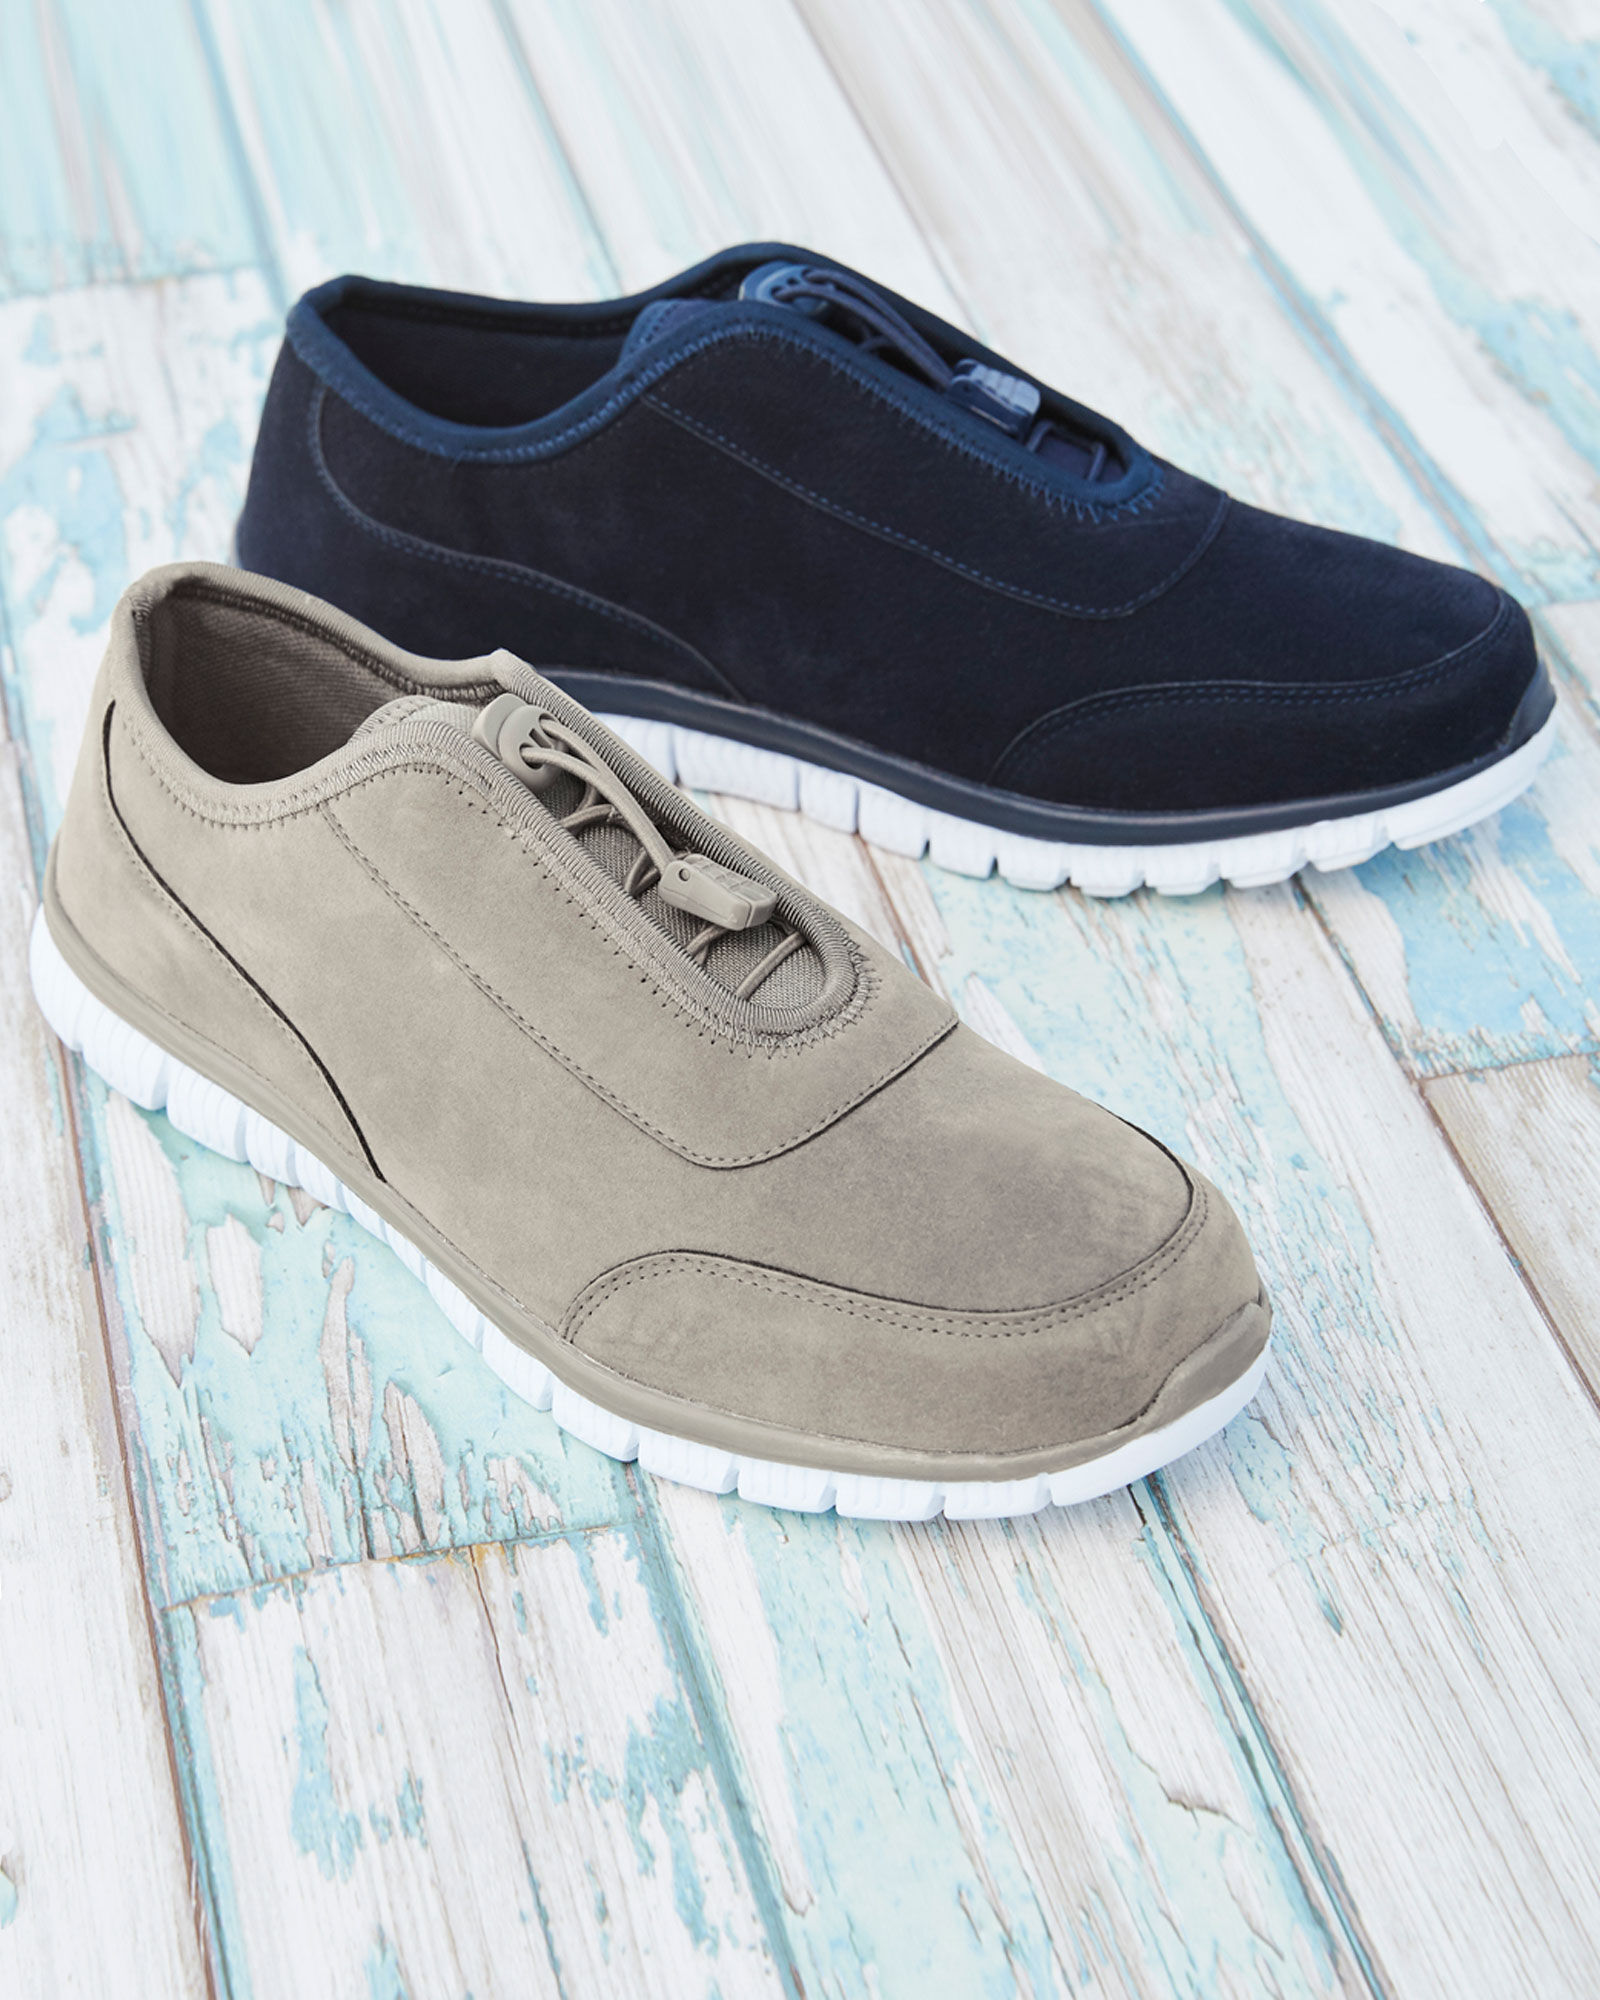 cotton traders ladies trainers